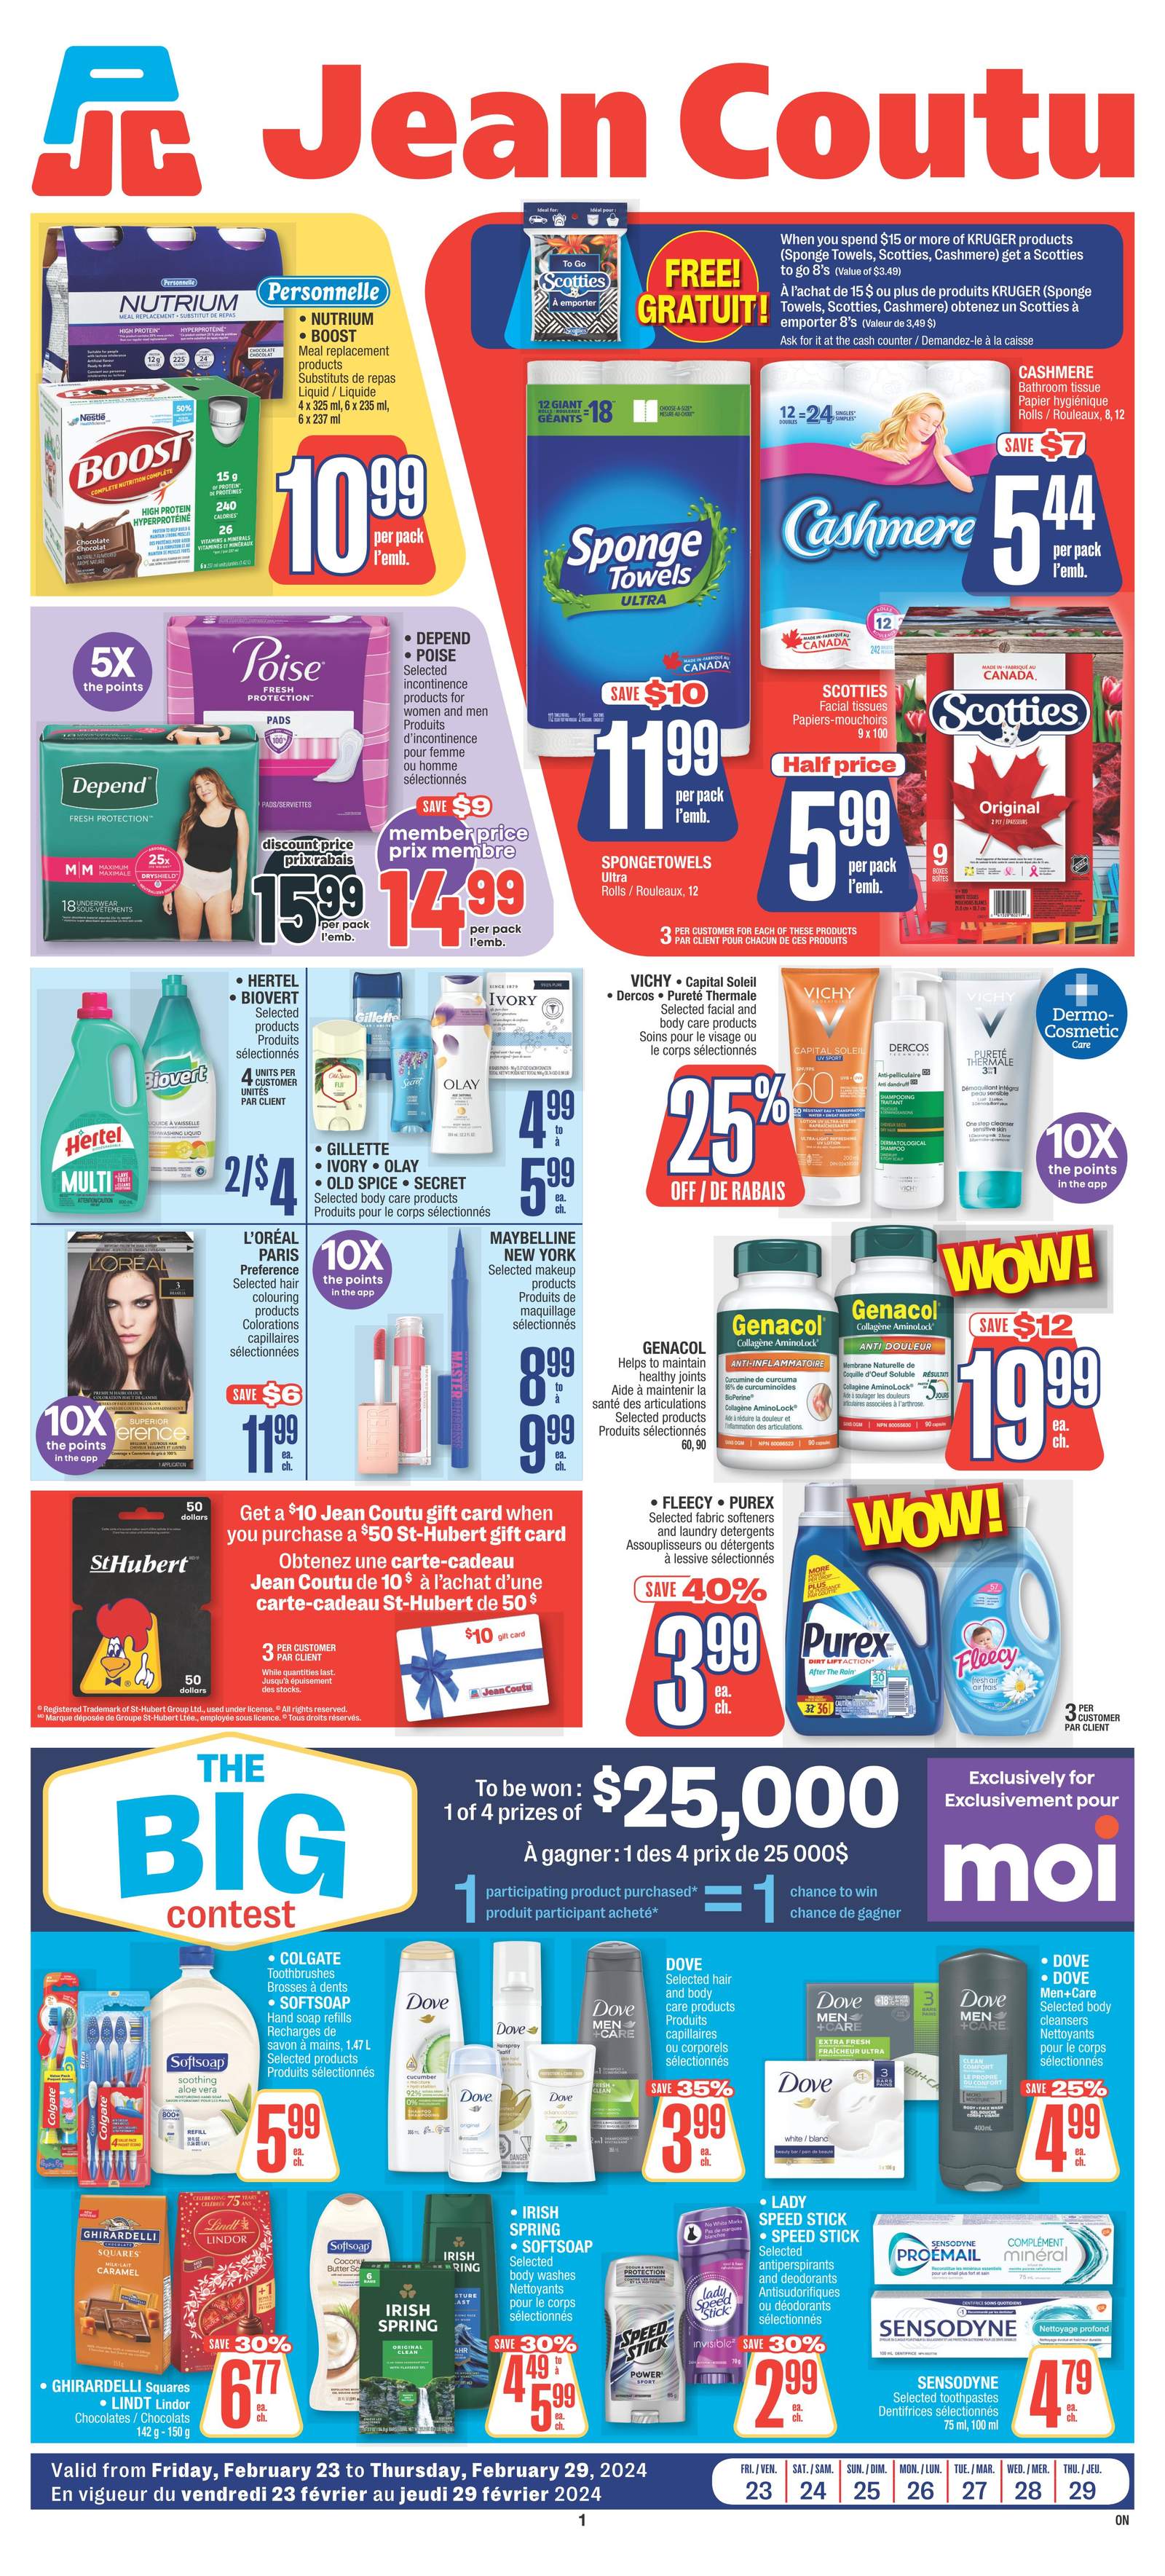 CAROLE MARTIN Selected bras, Jean Coutu deals this week, Jean Coutu flyer